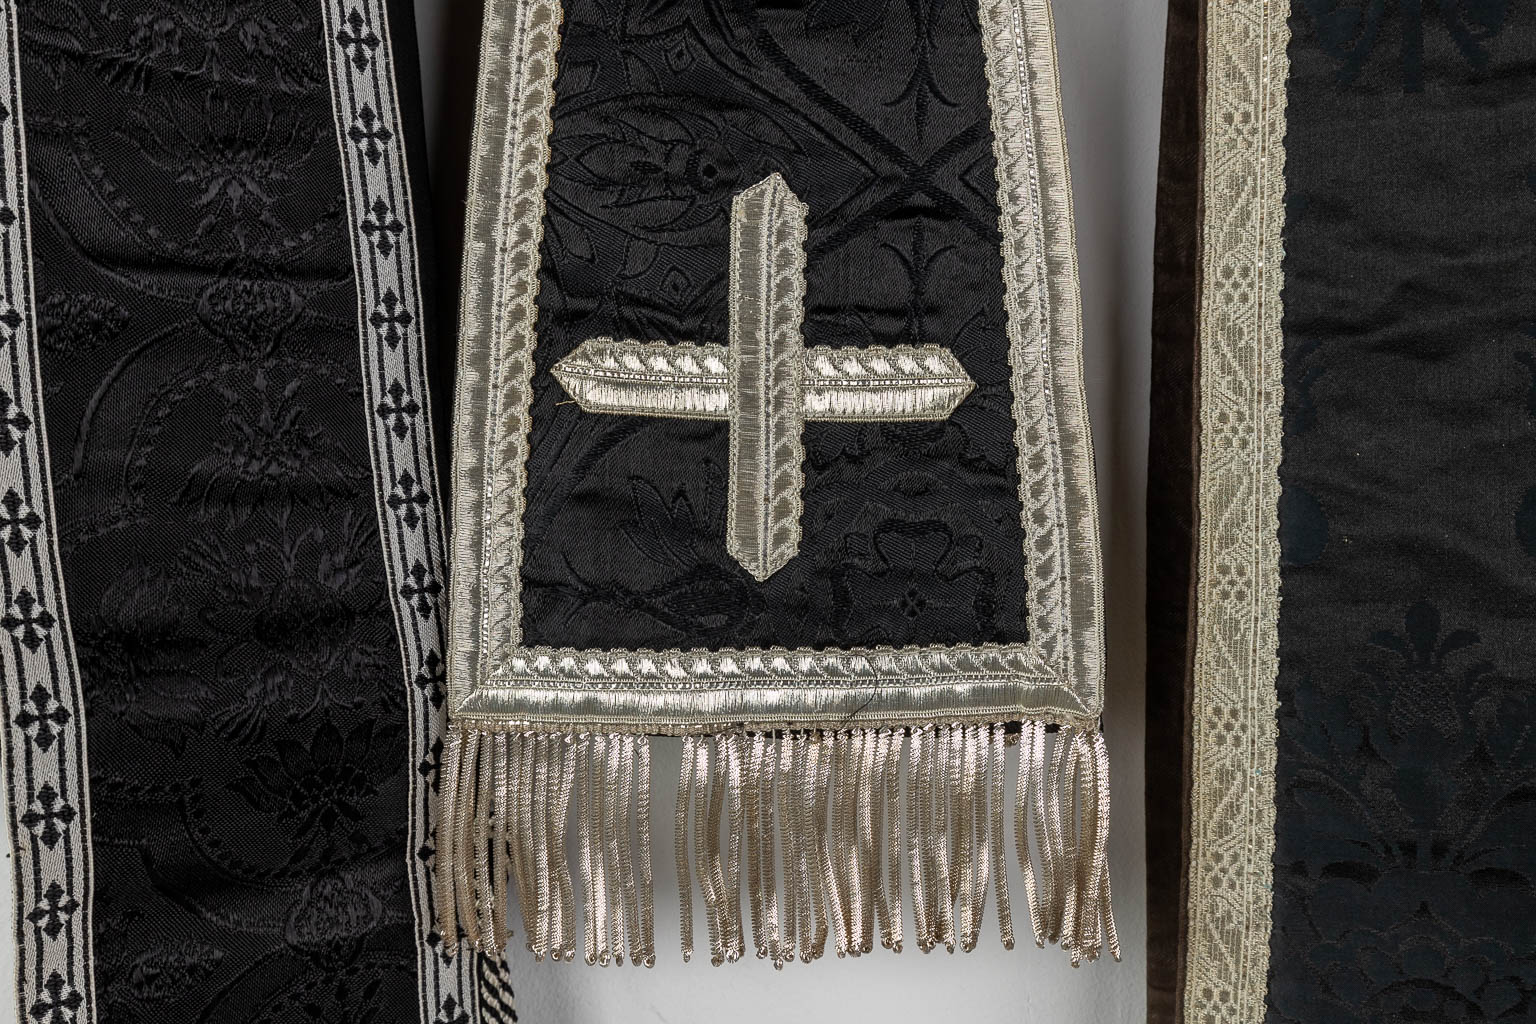 A set of Black Lithurgical Robes, Roman Chasubles, Stola, Manisple and Chalice Veils. 